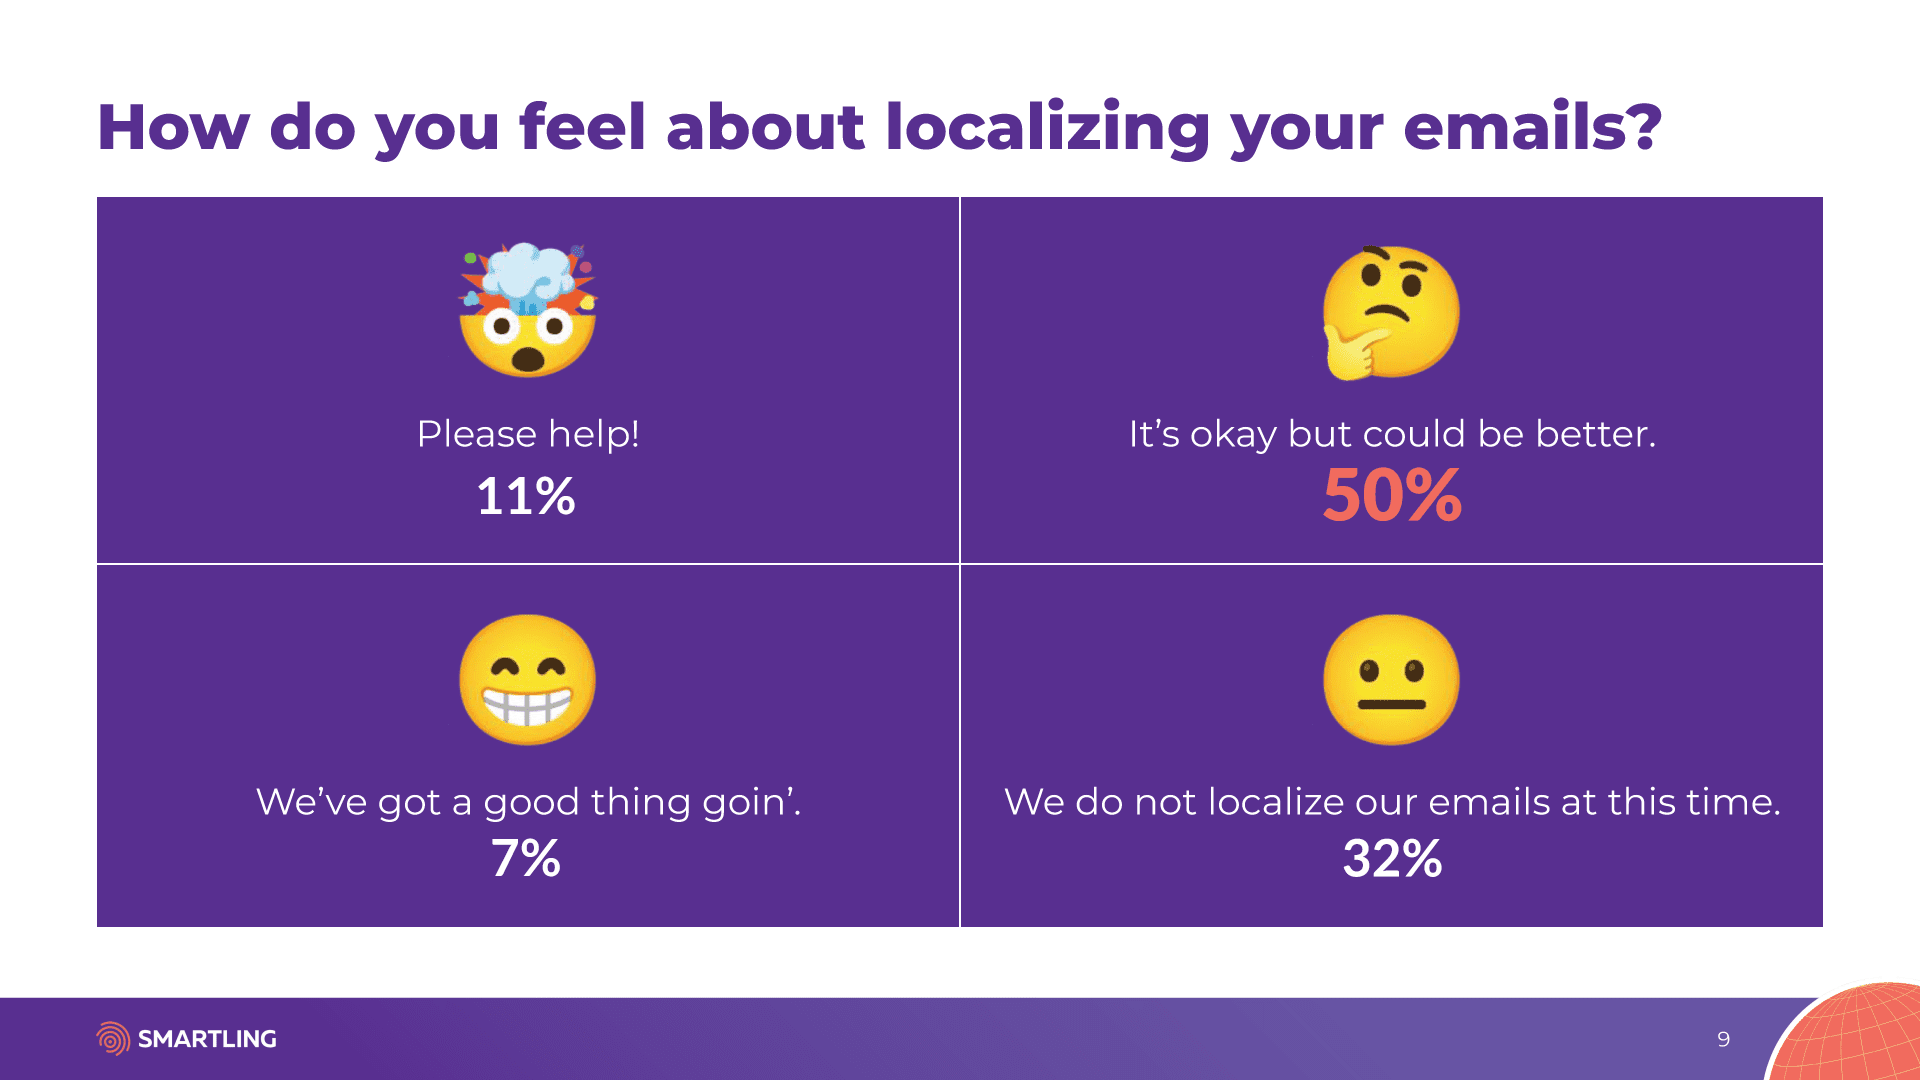 How do you feel about localizing your emails?